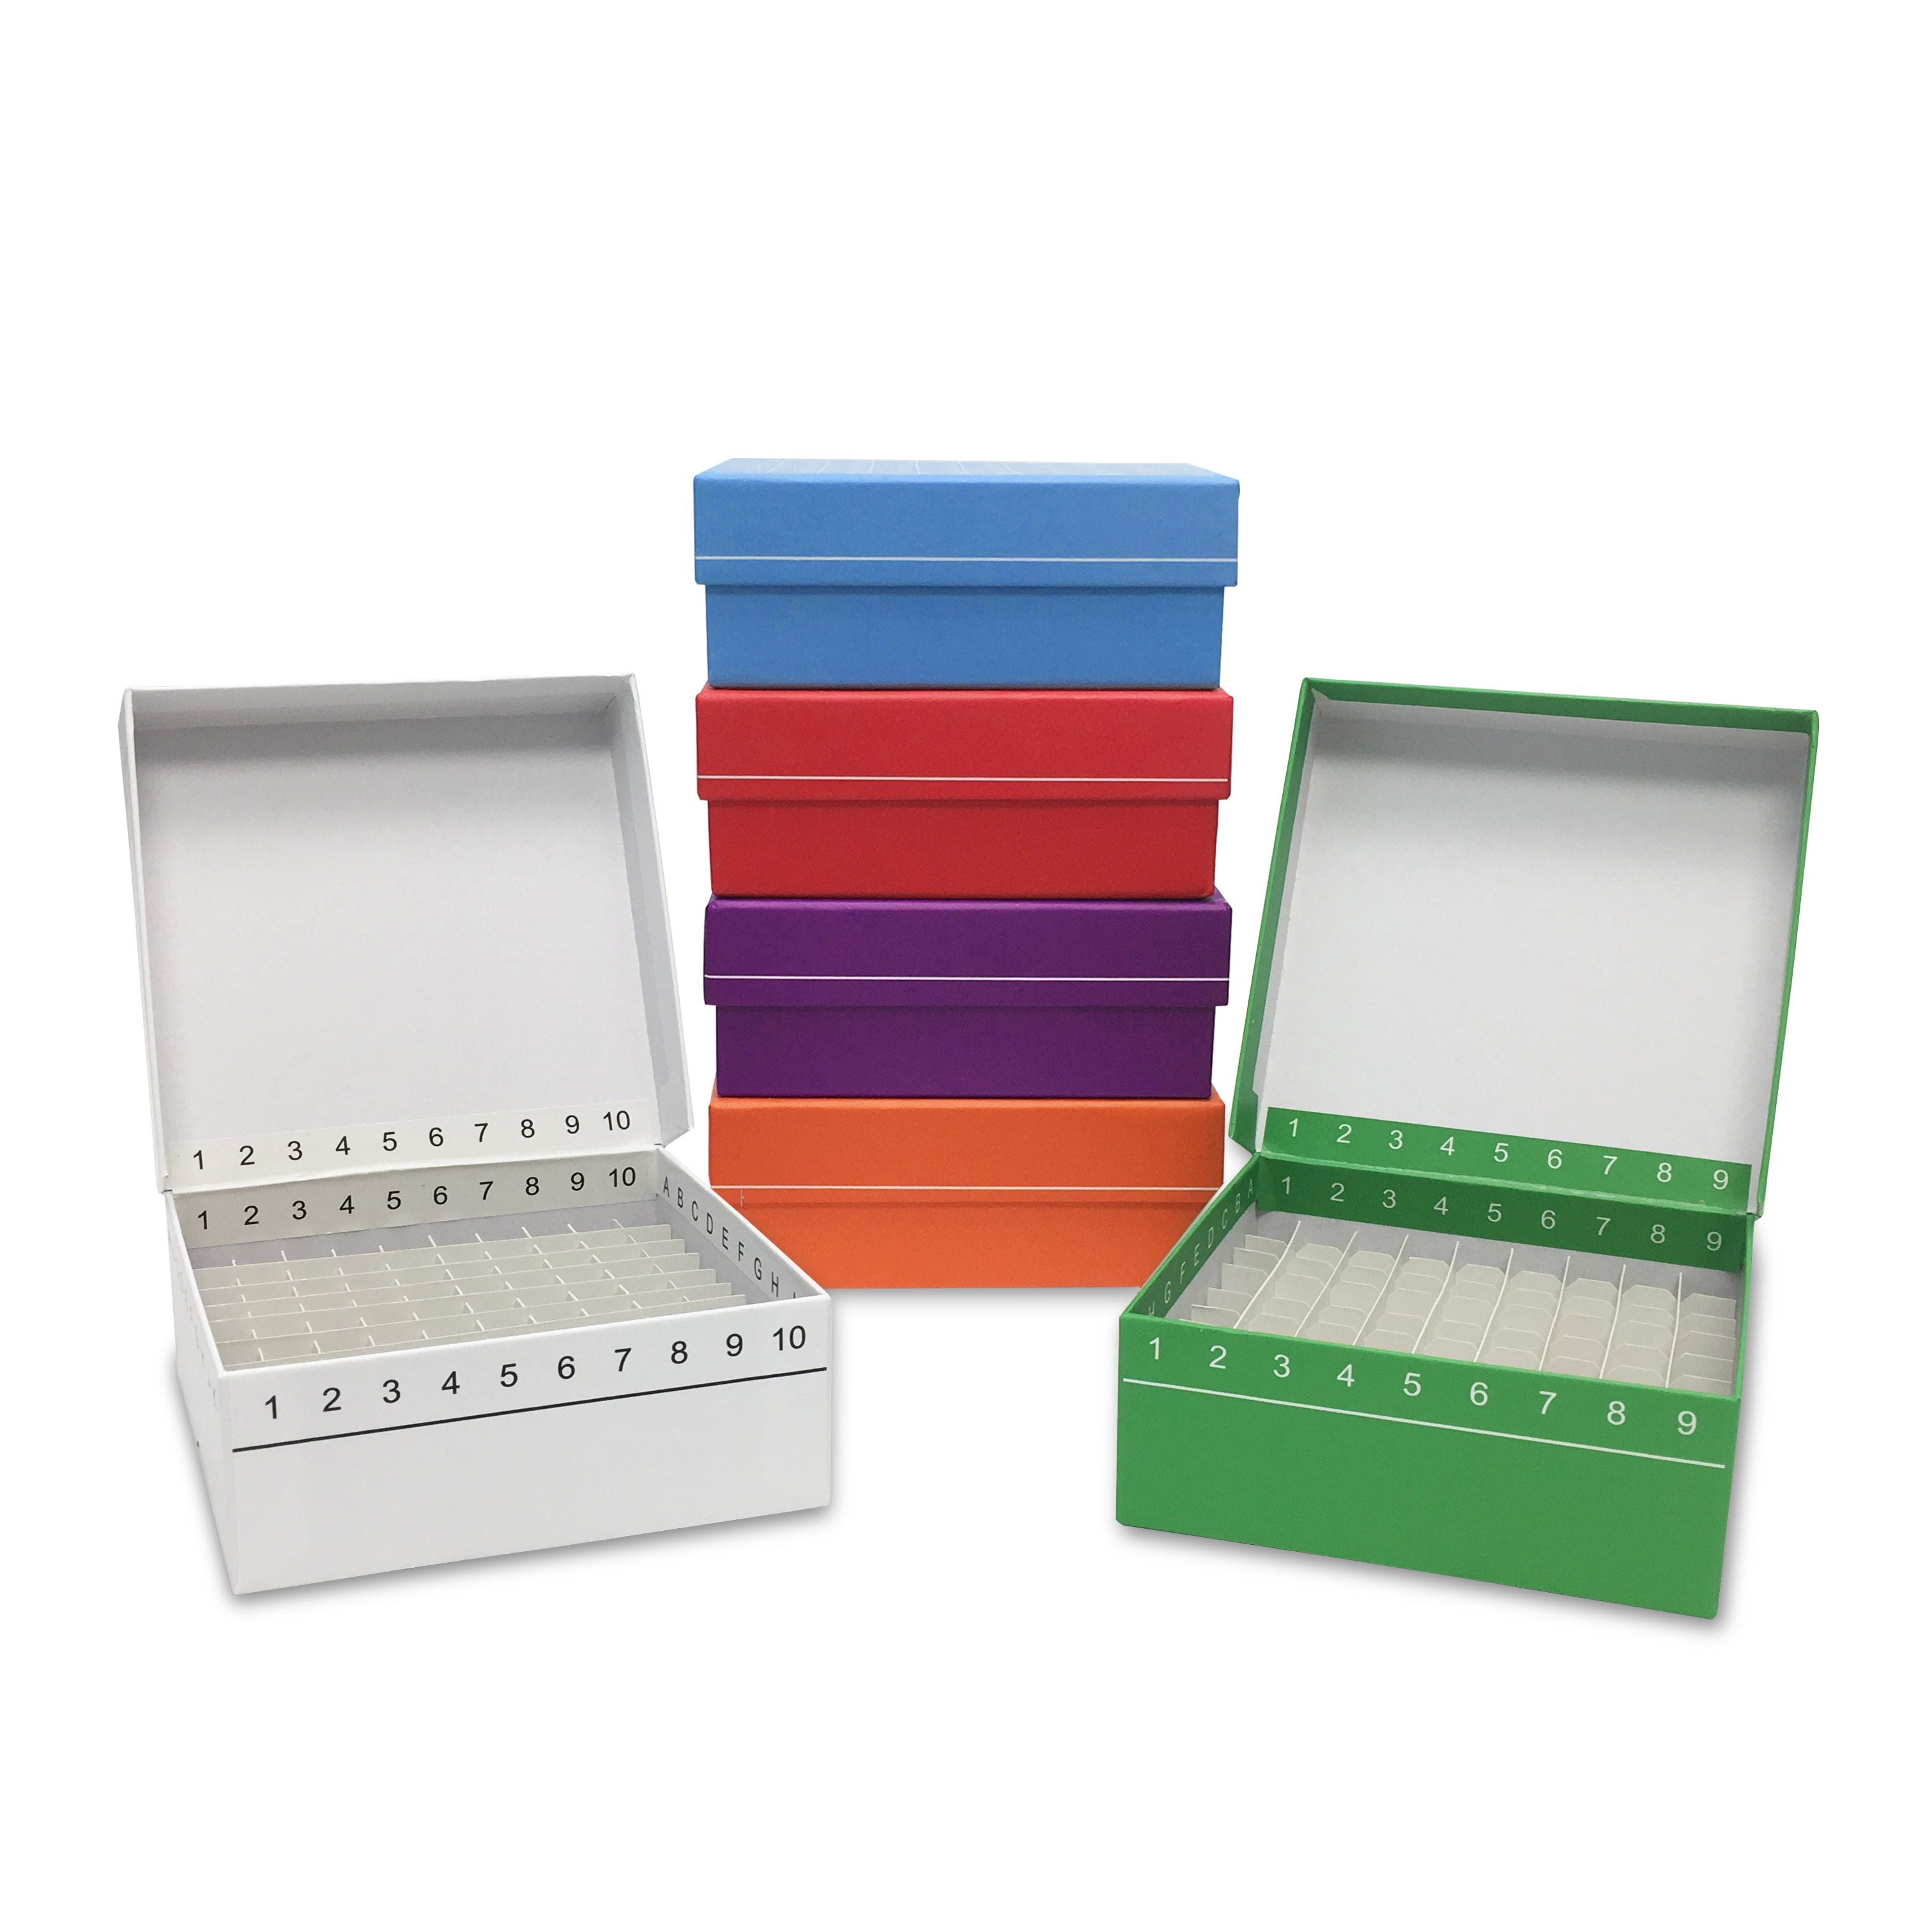 MTC Bio R2700-A FlipTop™ Carboard freezer box w/ attached hinged lid, 100-place, assorted colors, 5/pk